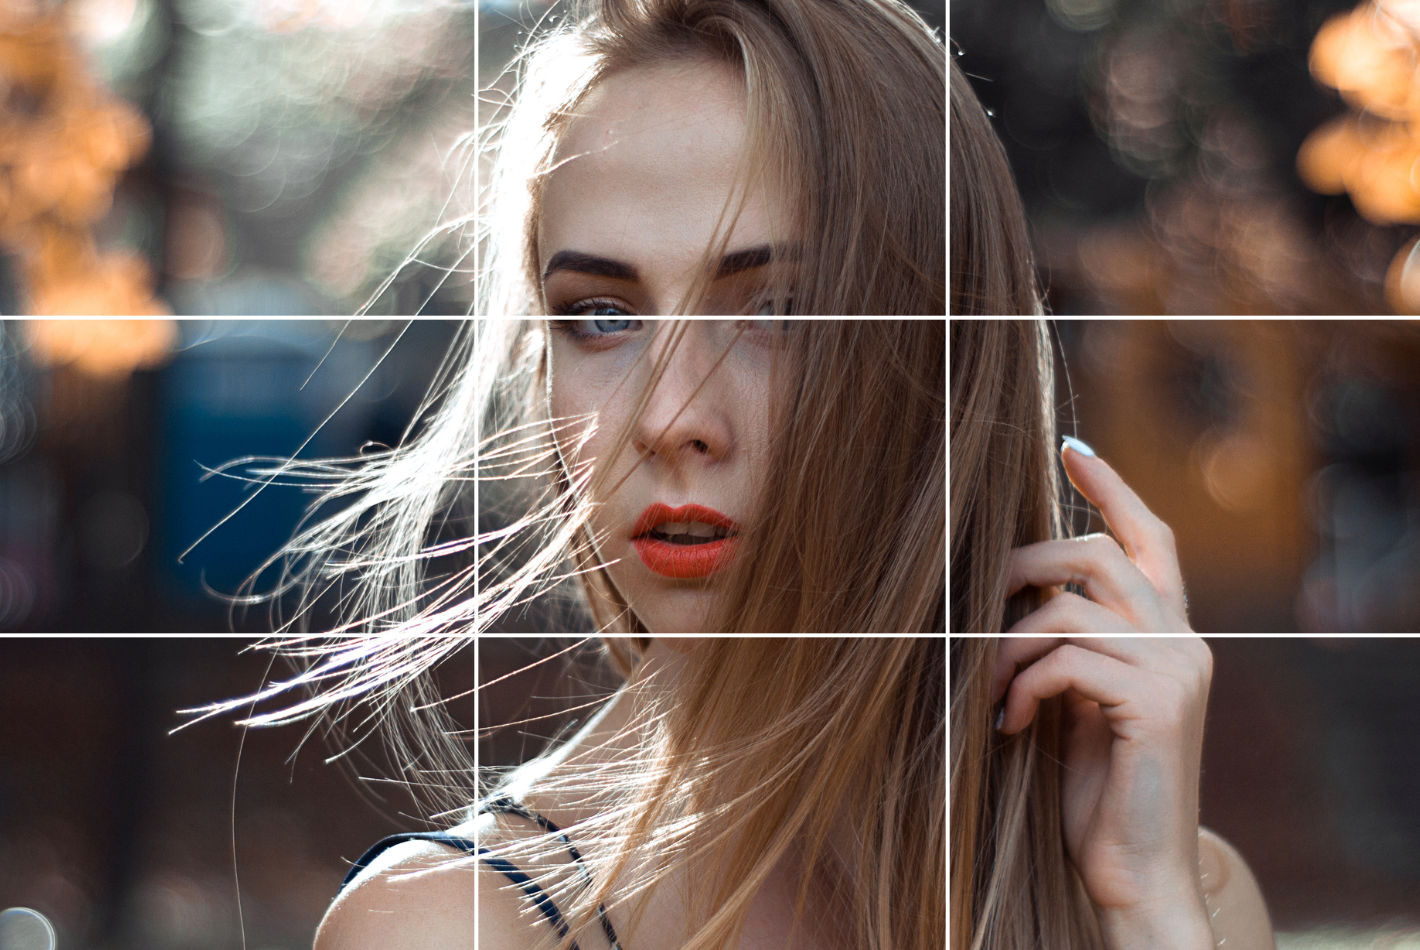 rule of thirds photography examples